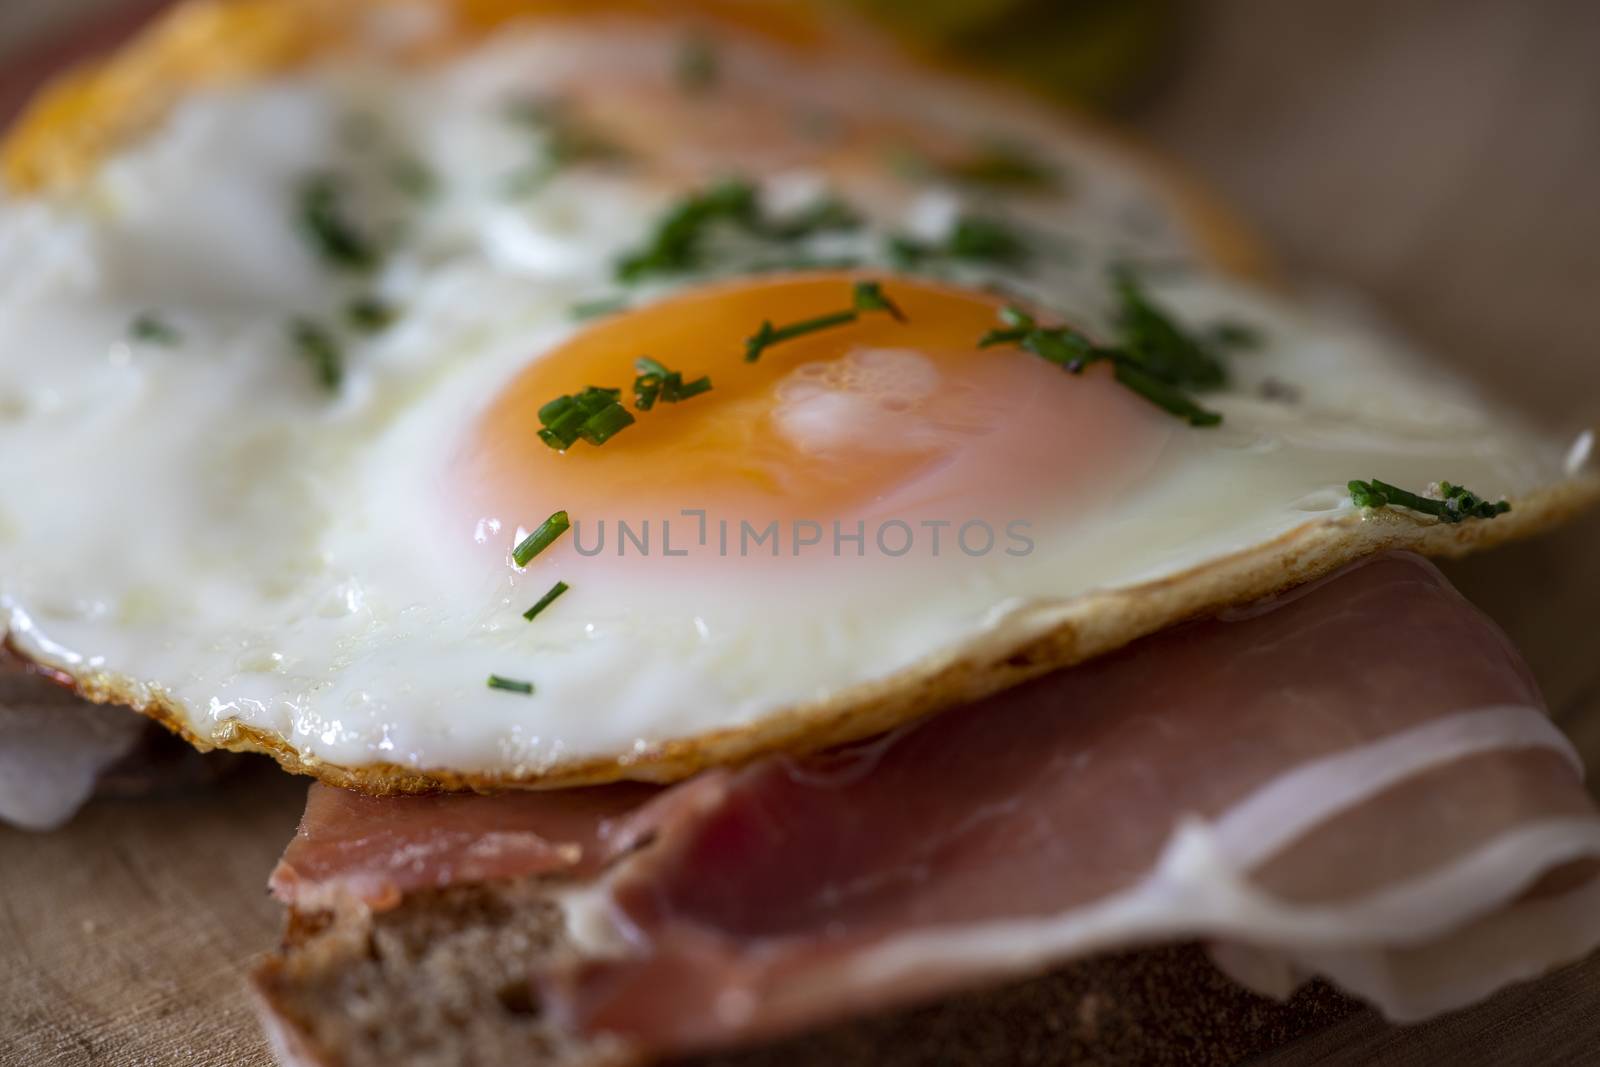 eggs sunny side up by bernjuer